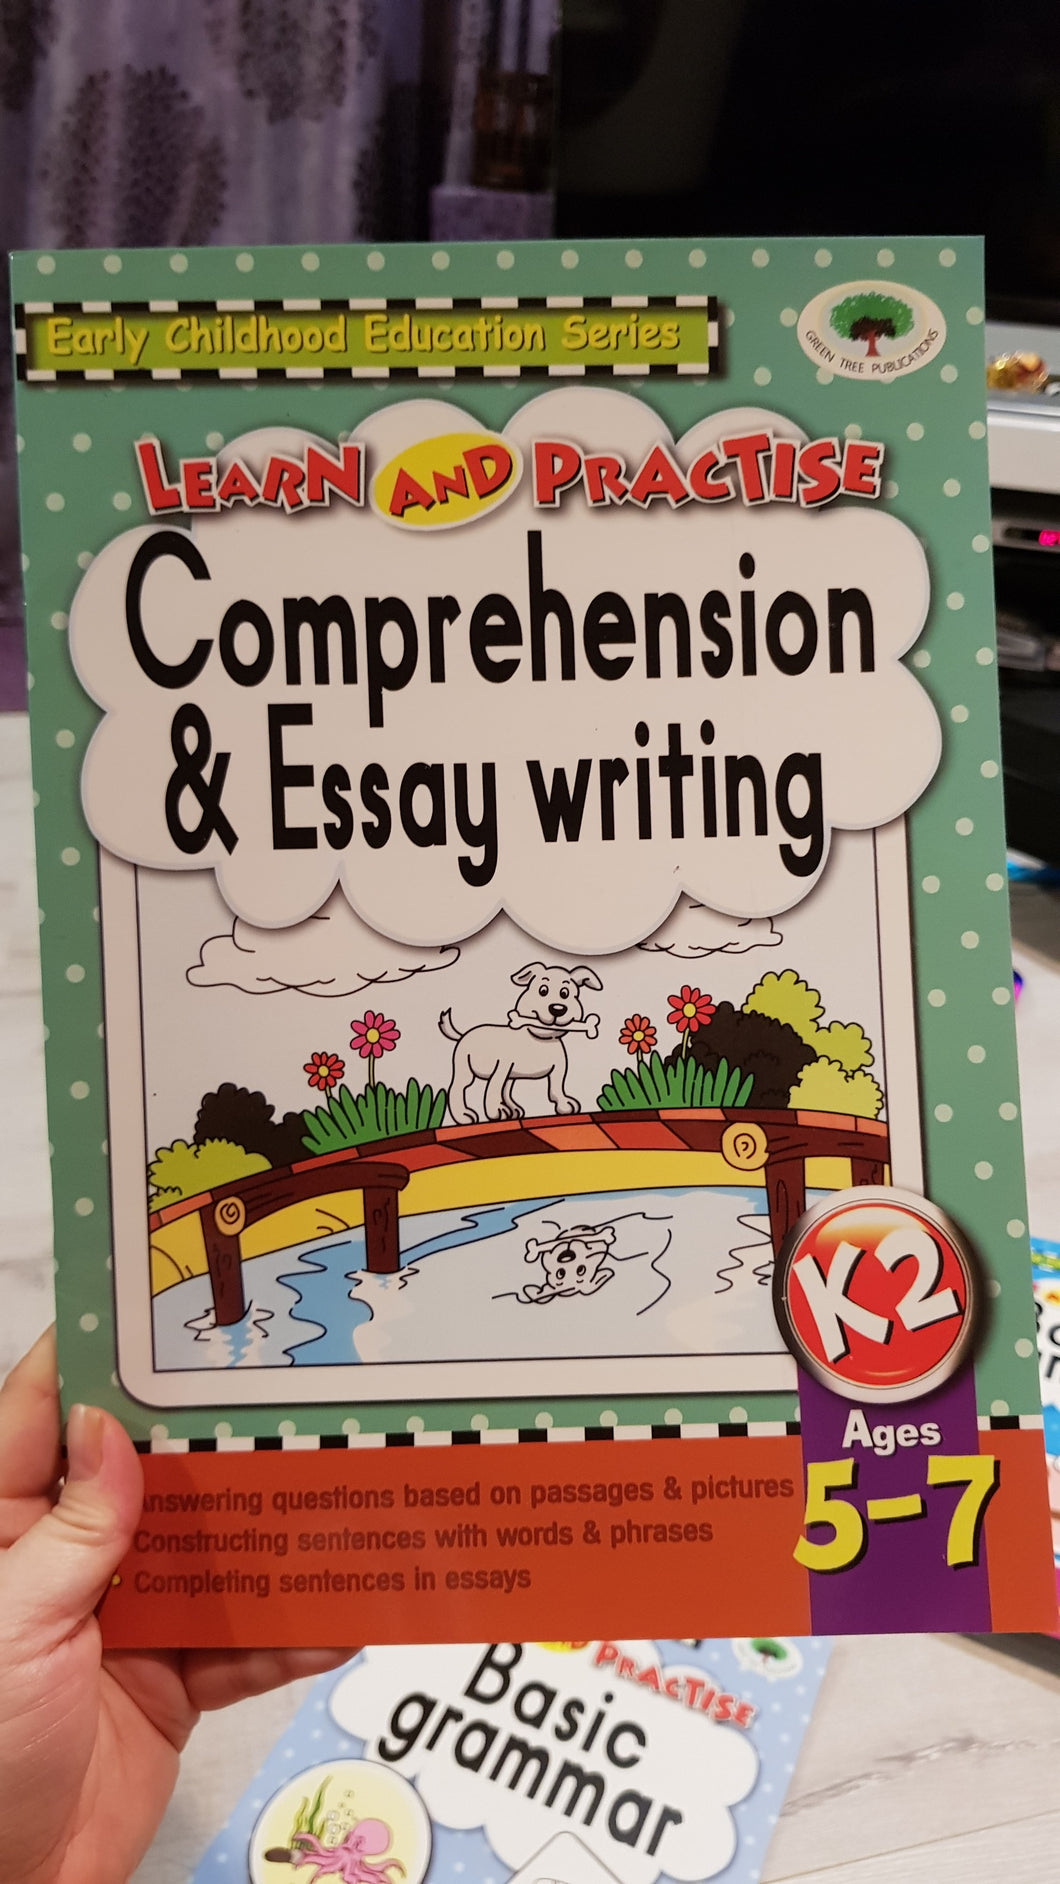 LEARN & PRACTICE COMPREHENSION & EASY WRITING AGES 5-7